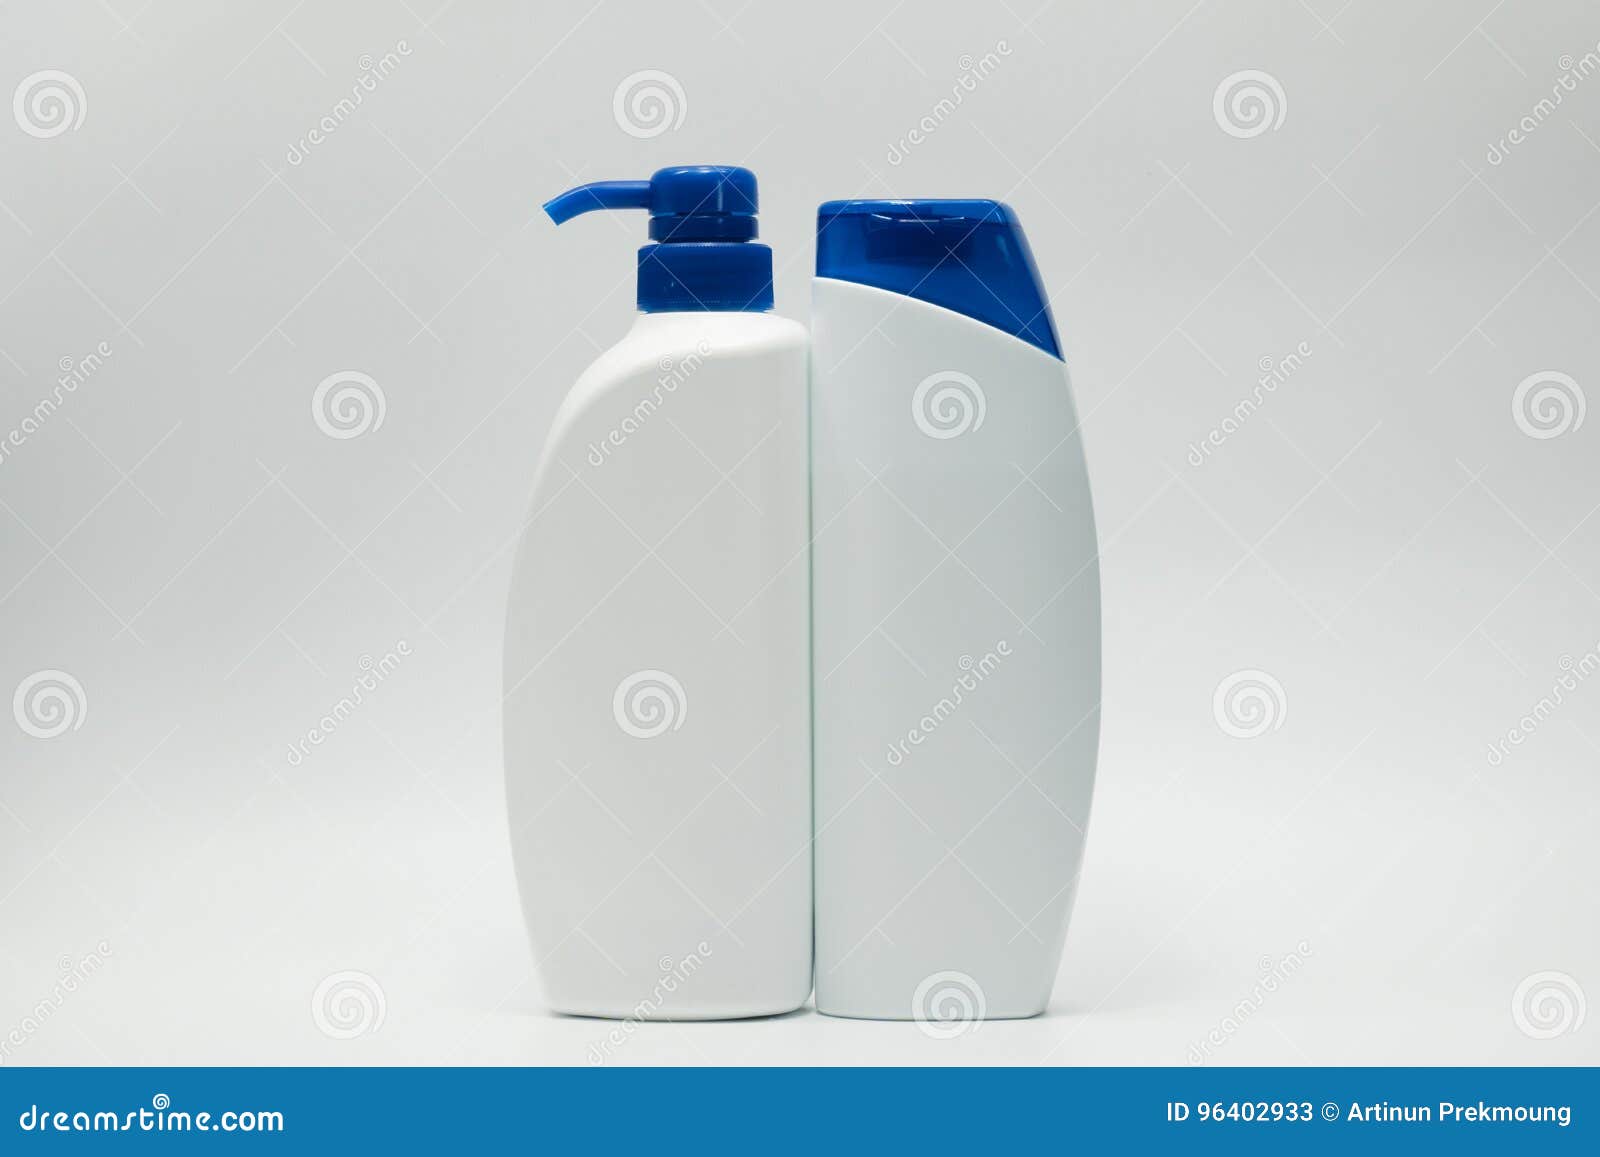 shampoo and conditioner bottles with blue cap